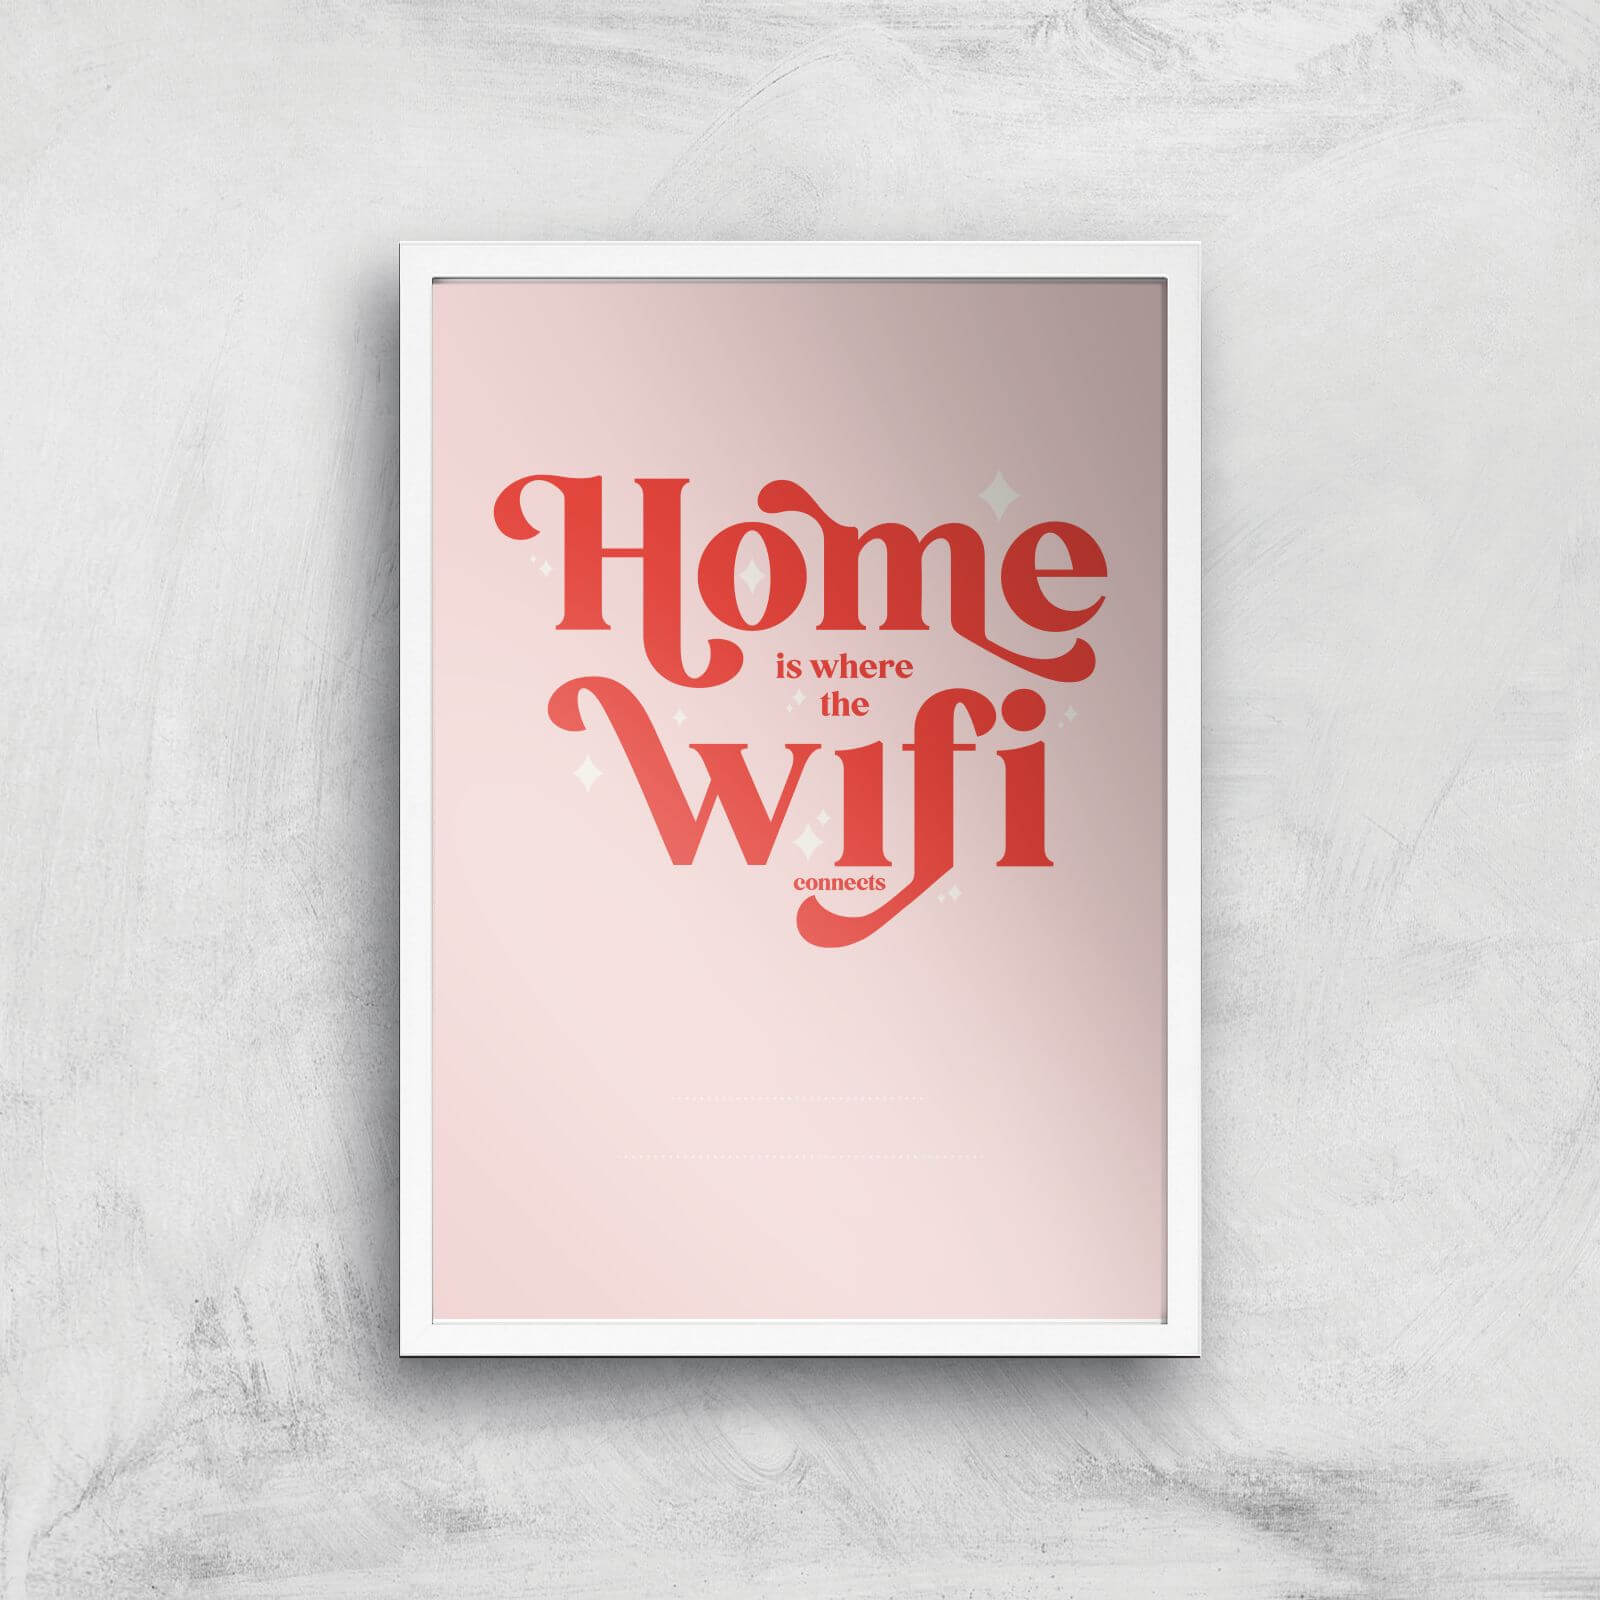 Hermione Chantal Light Home Is Where The Wifi Is Giclee Art Print - A2 - White Frame